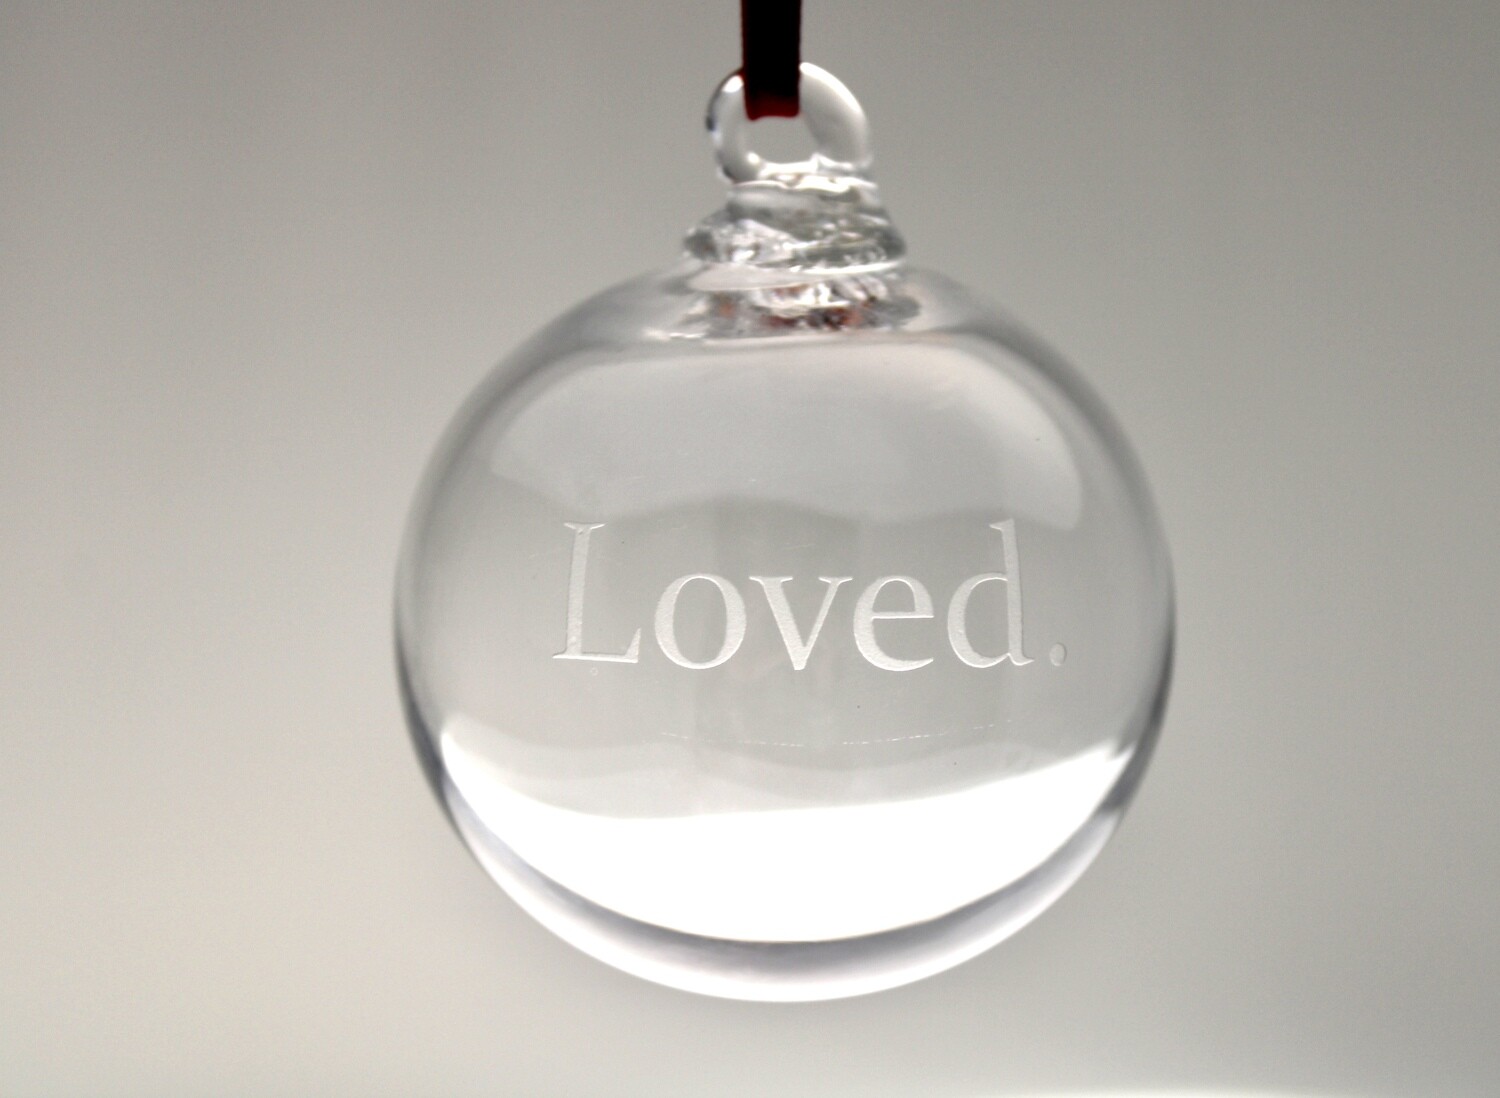 Loved. Blown Ornament